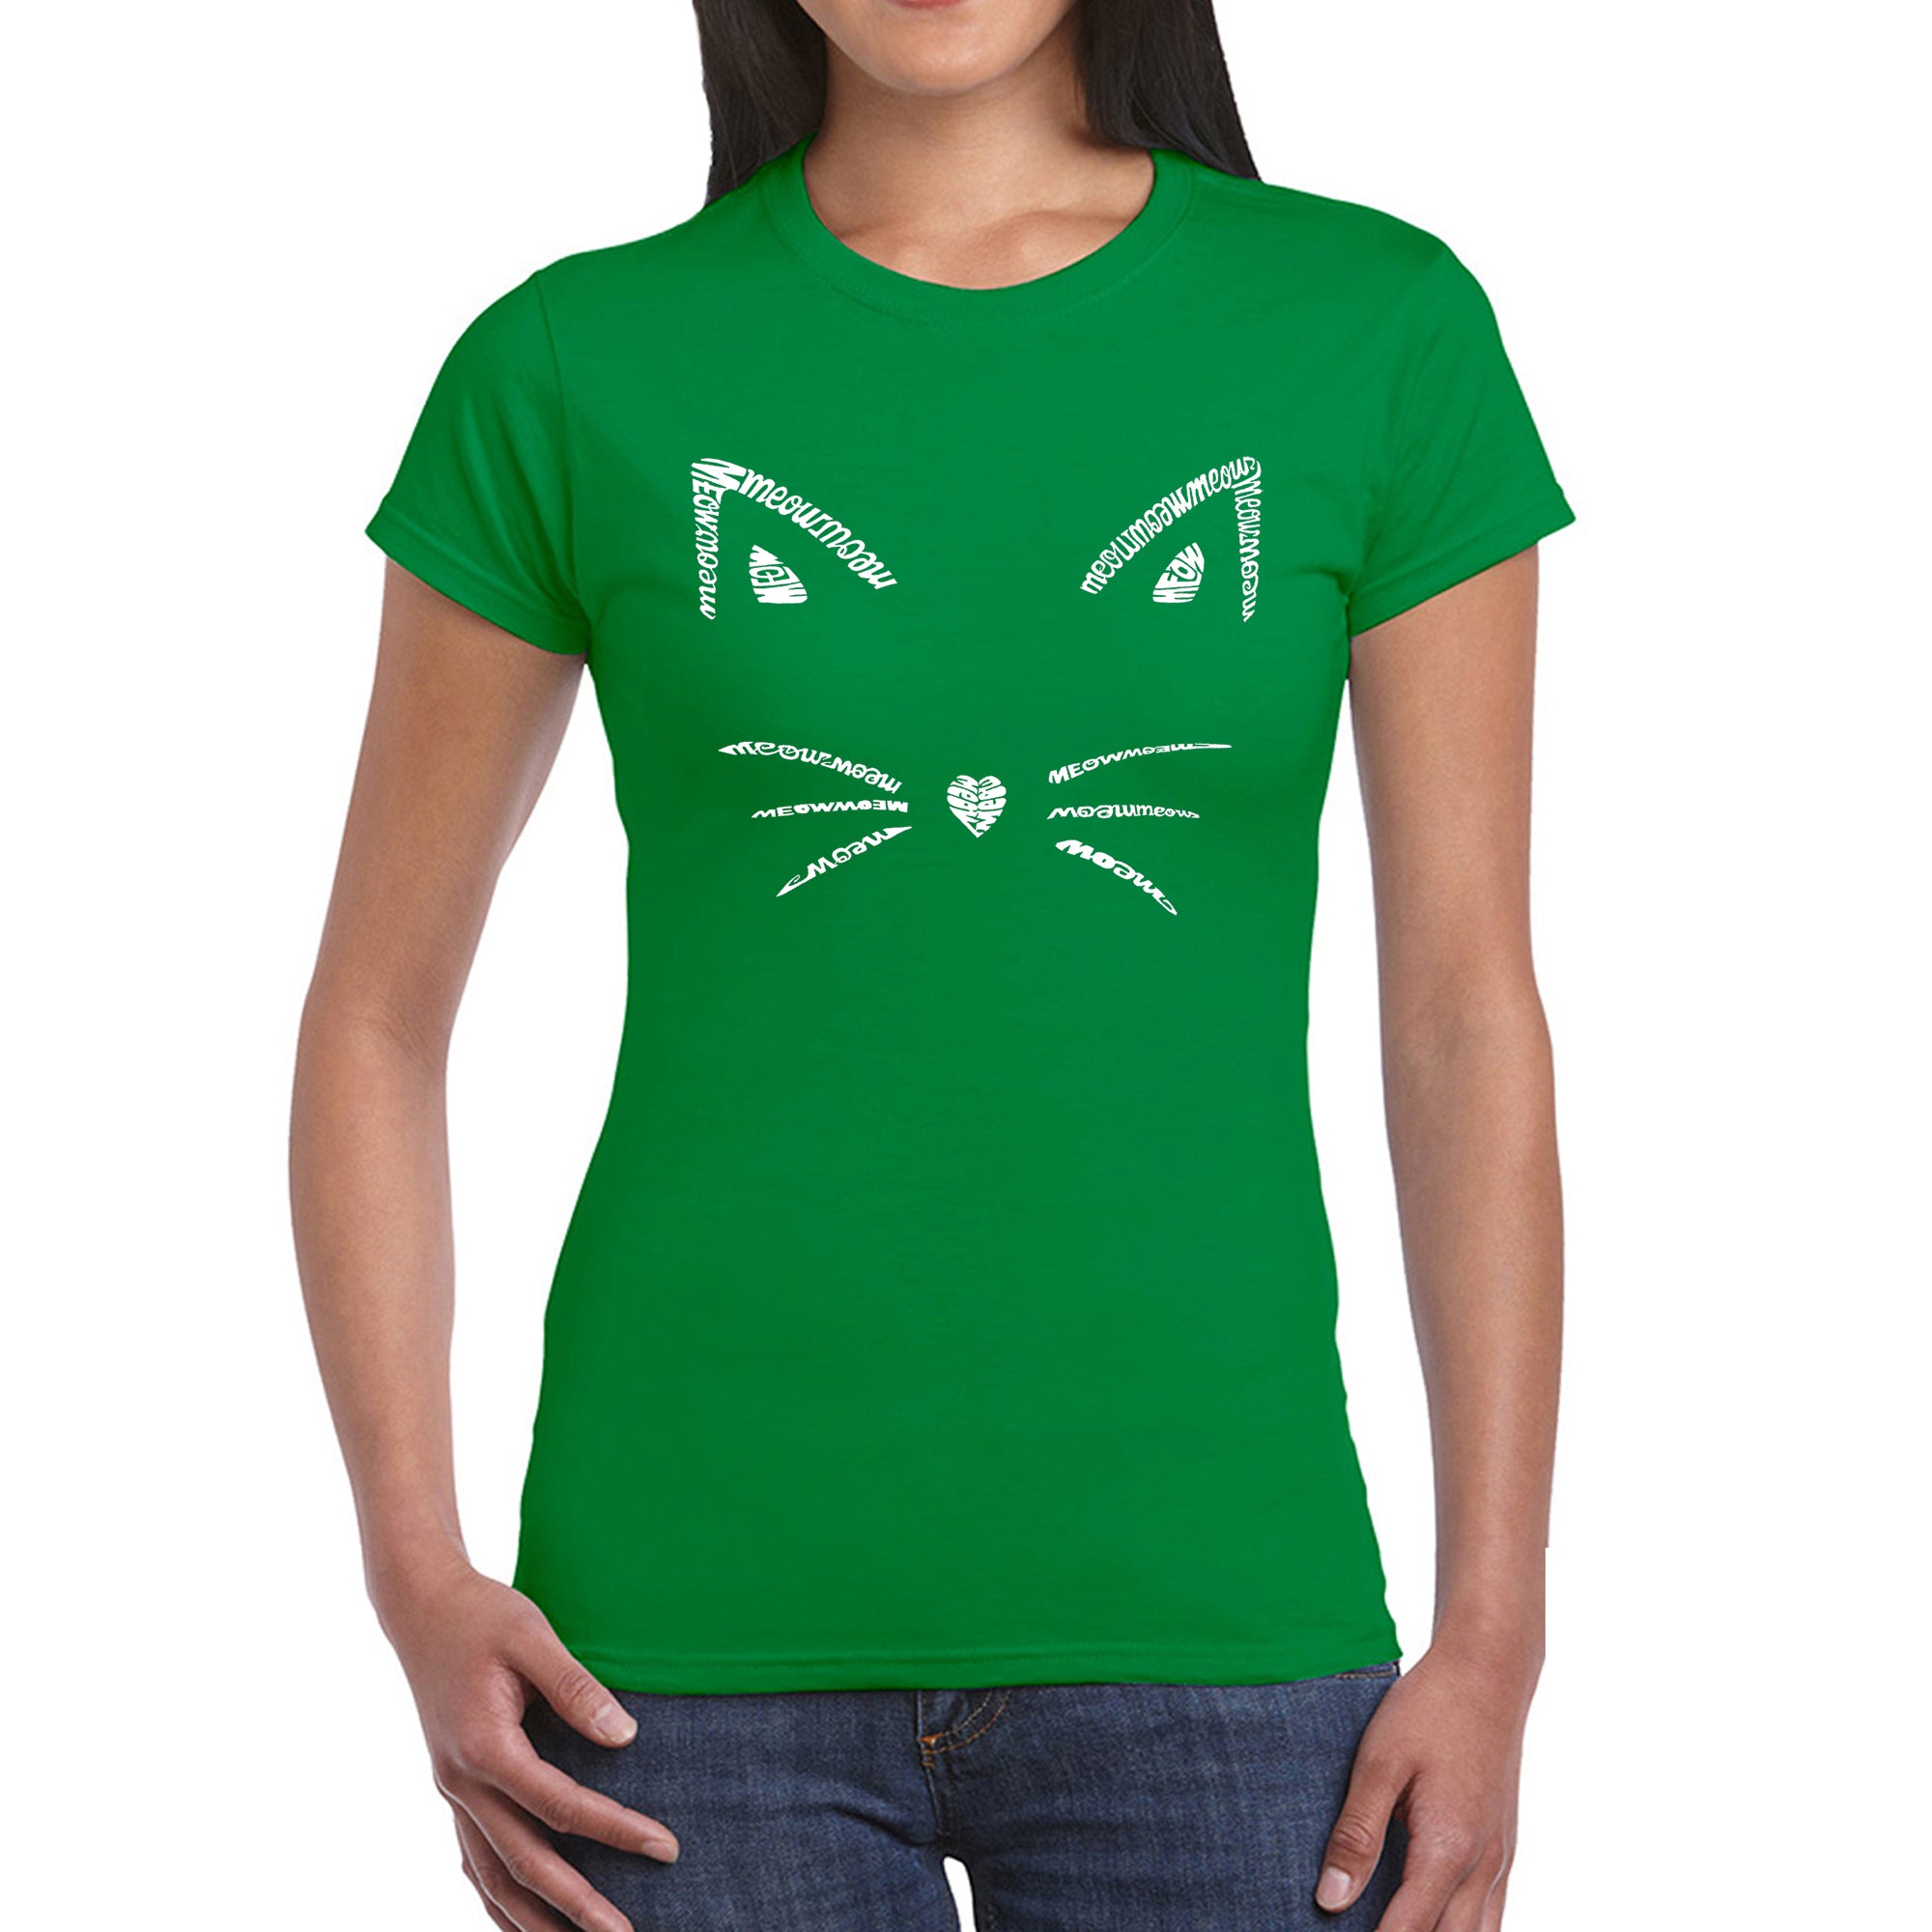 Whiskers - Women's Word Art T-Shirt - Kelly - Small